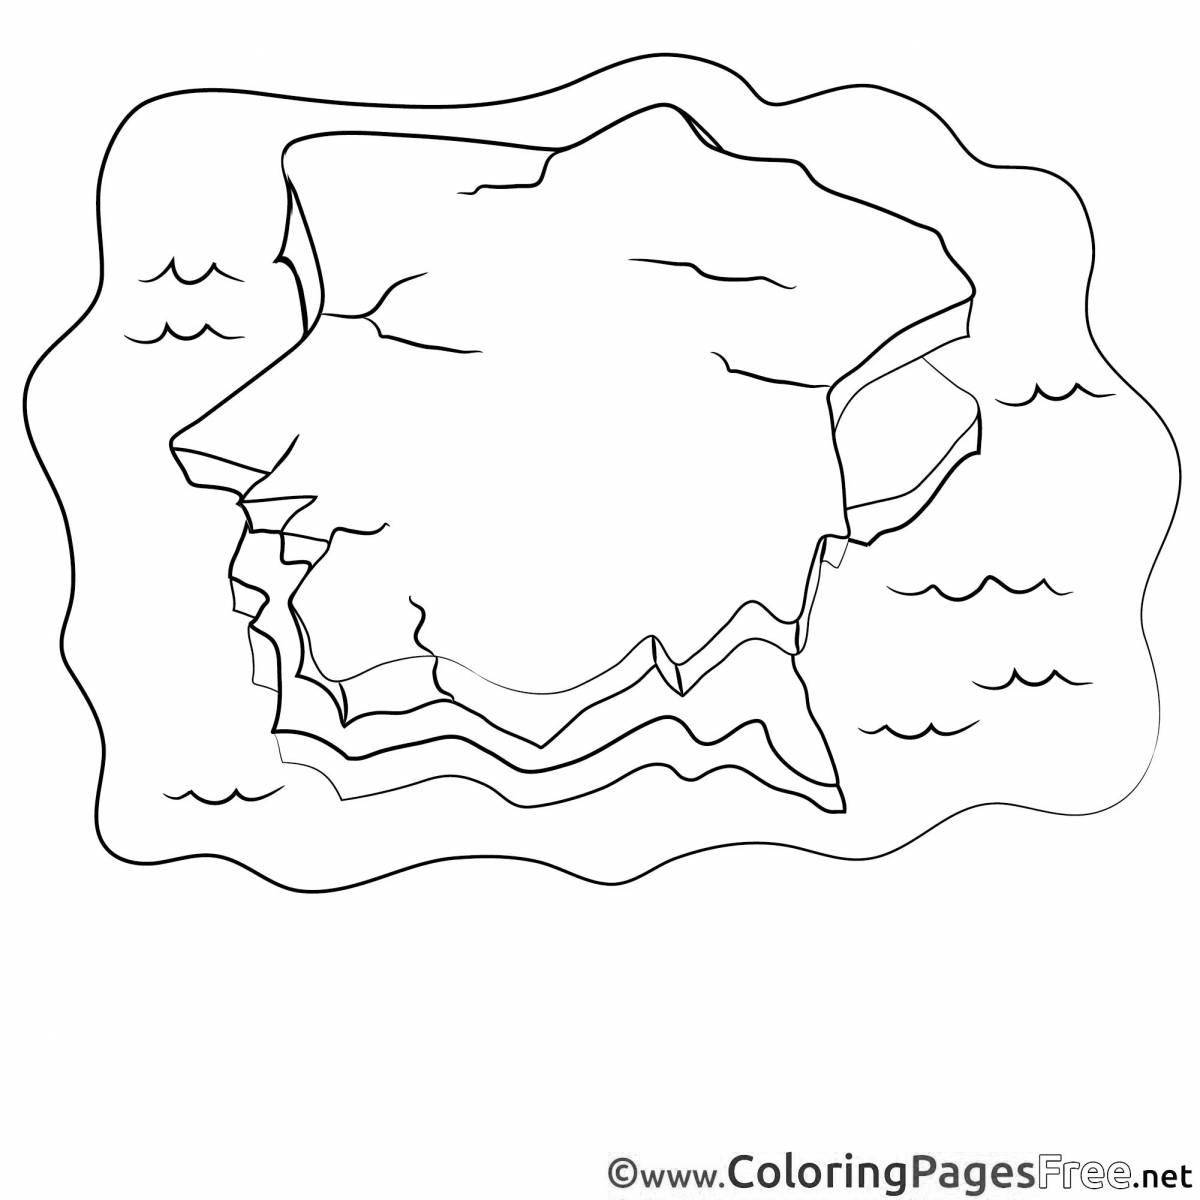 A fun ice floe coloring book for kids